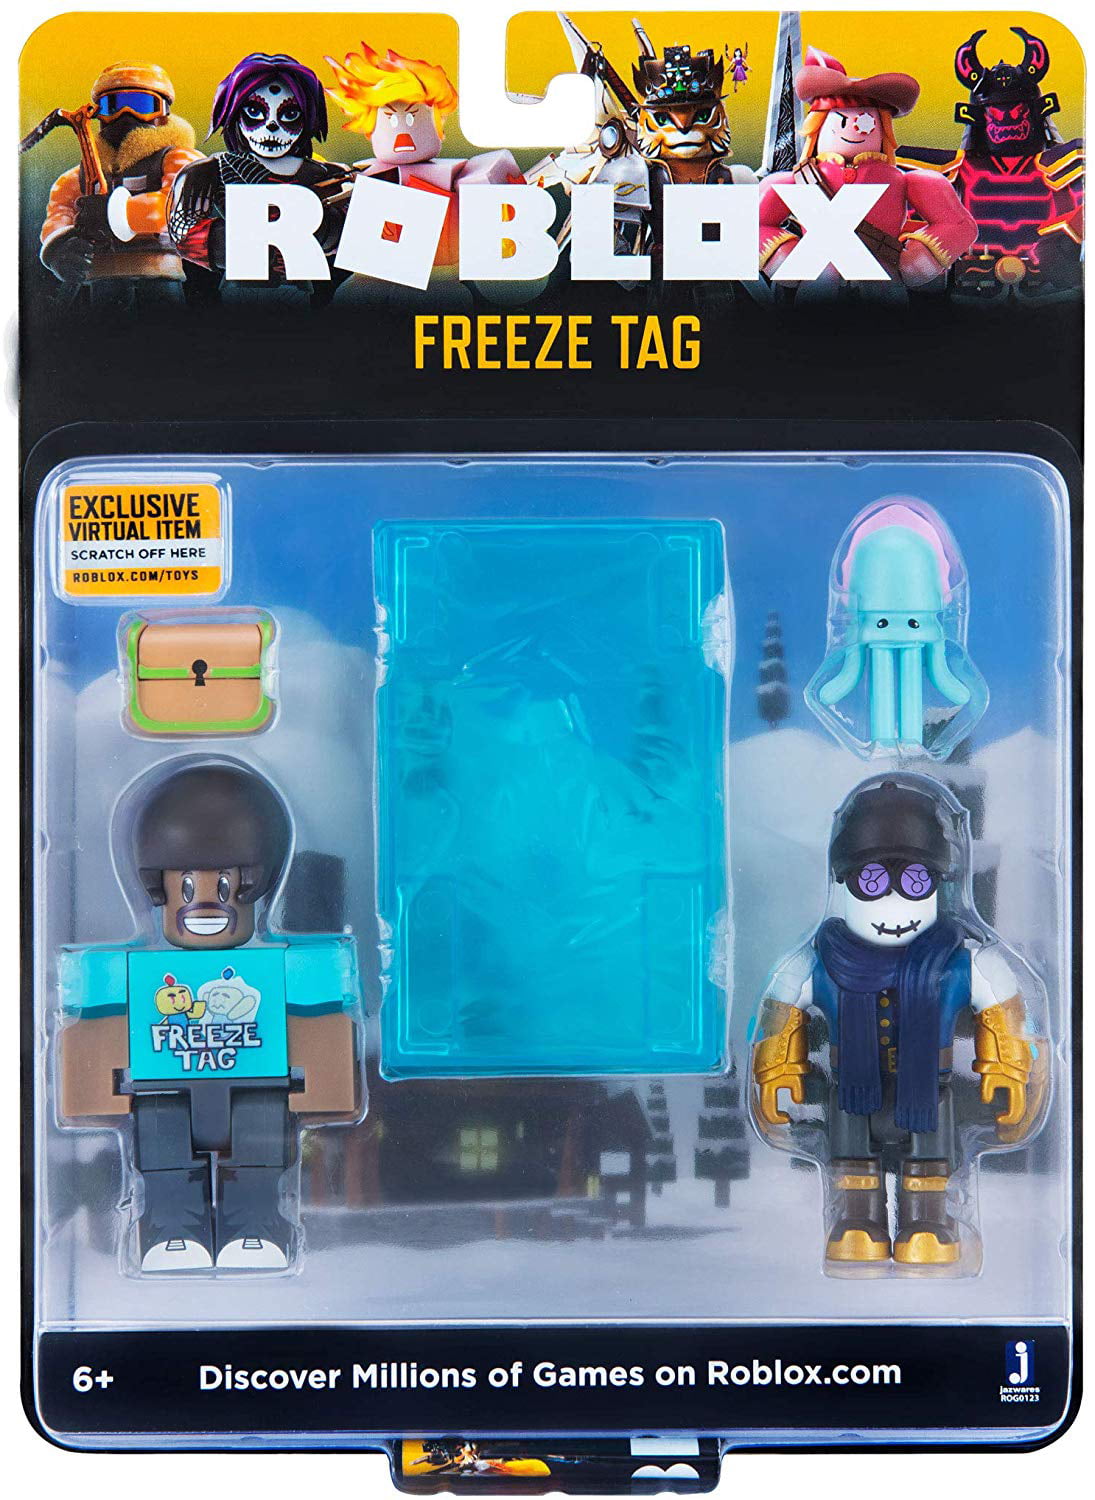 Roblox Celebrity Freeze Tag Game Pack Walmart Com Walmart Com - freeze tag new maps in roblox